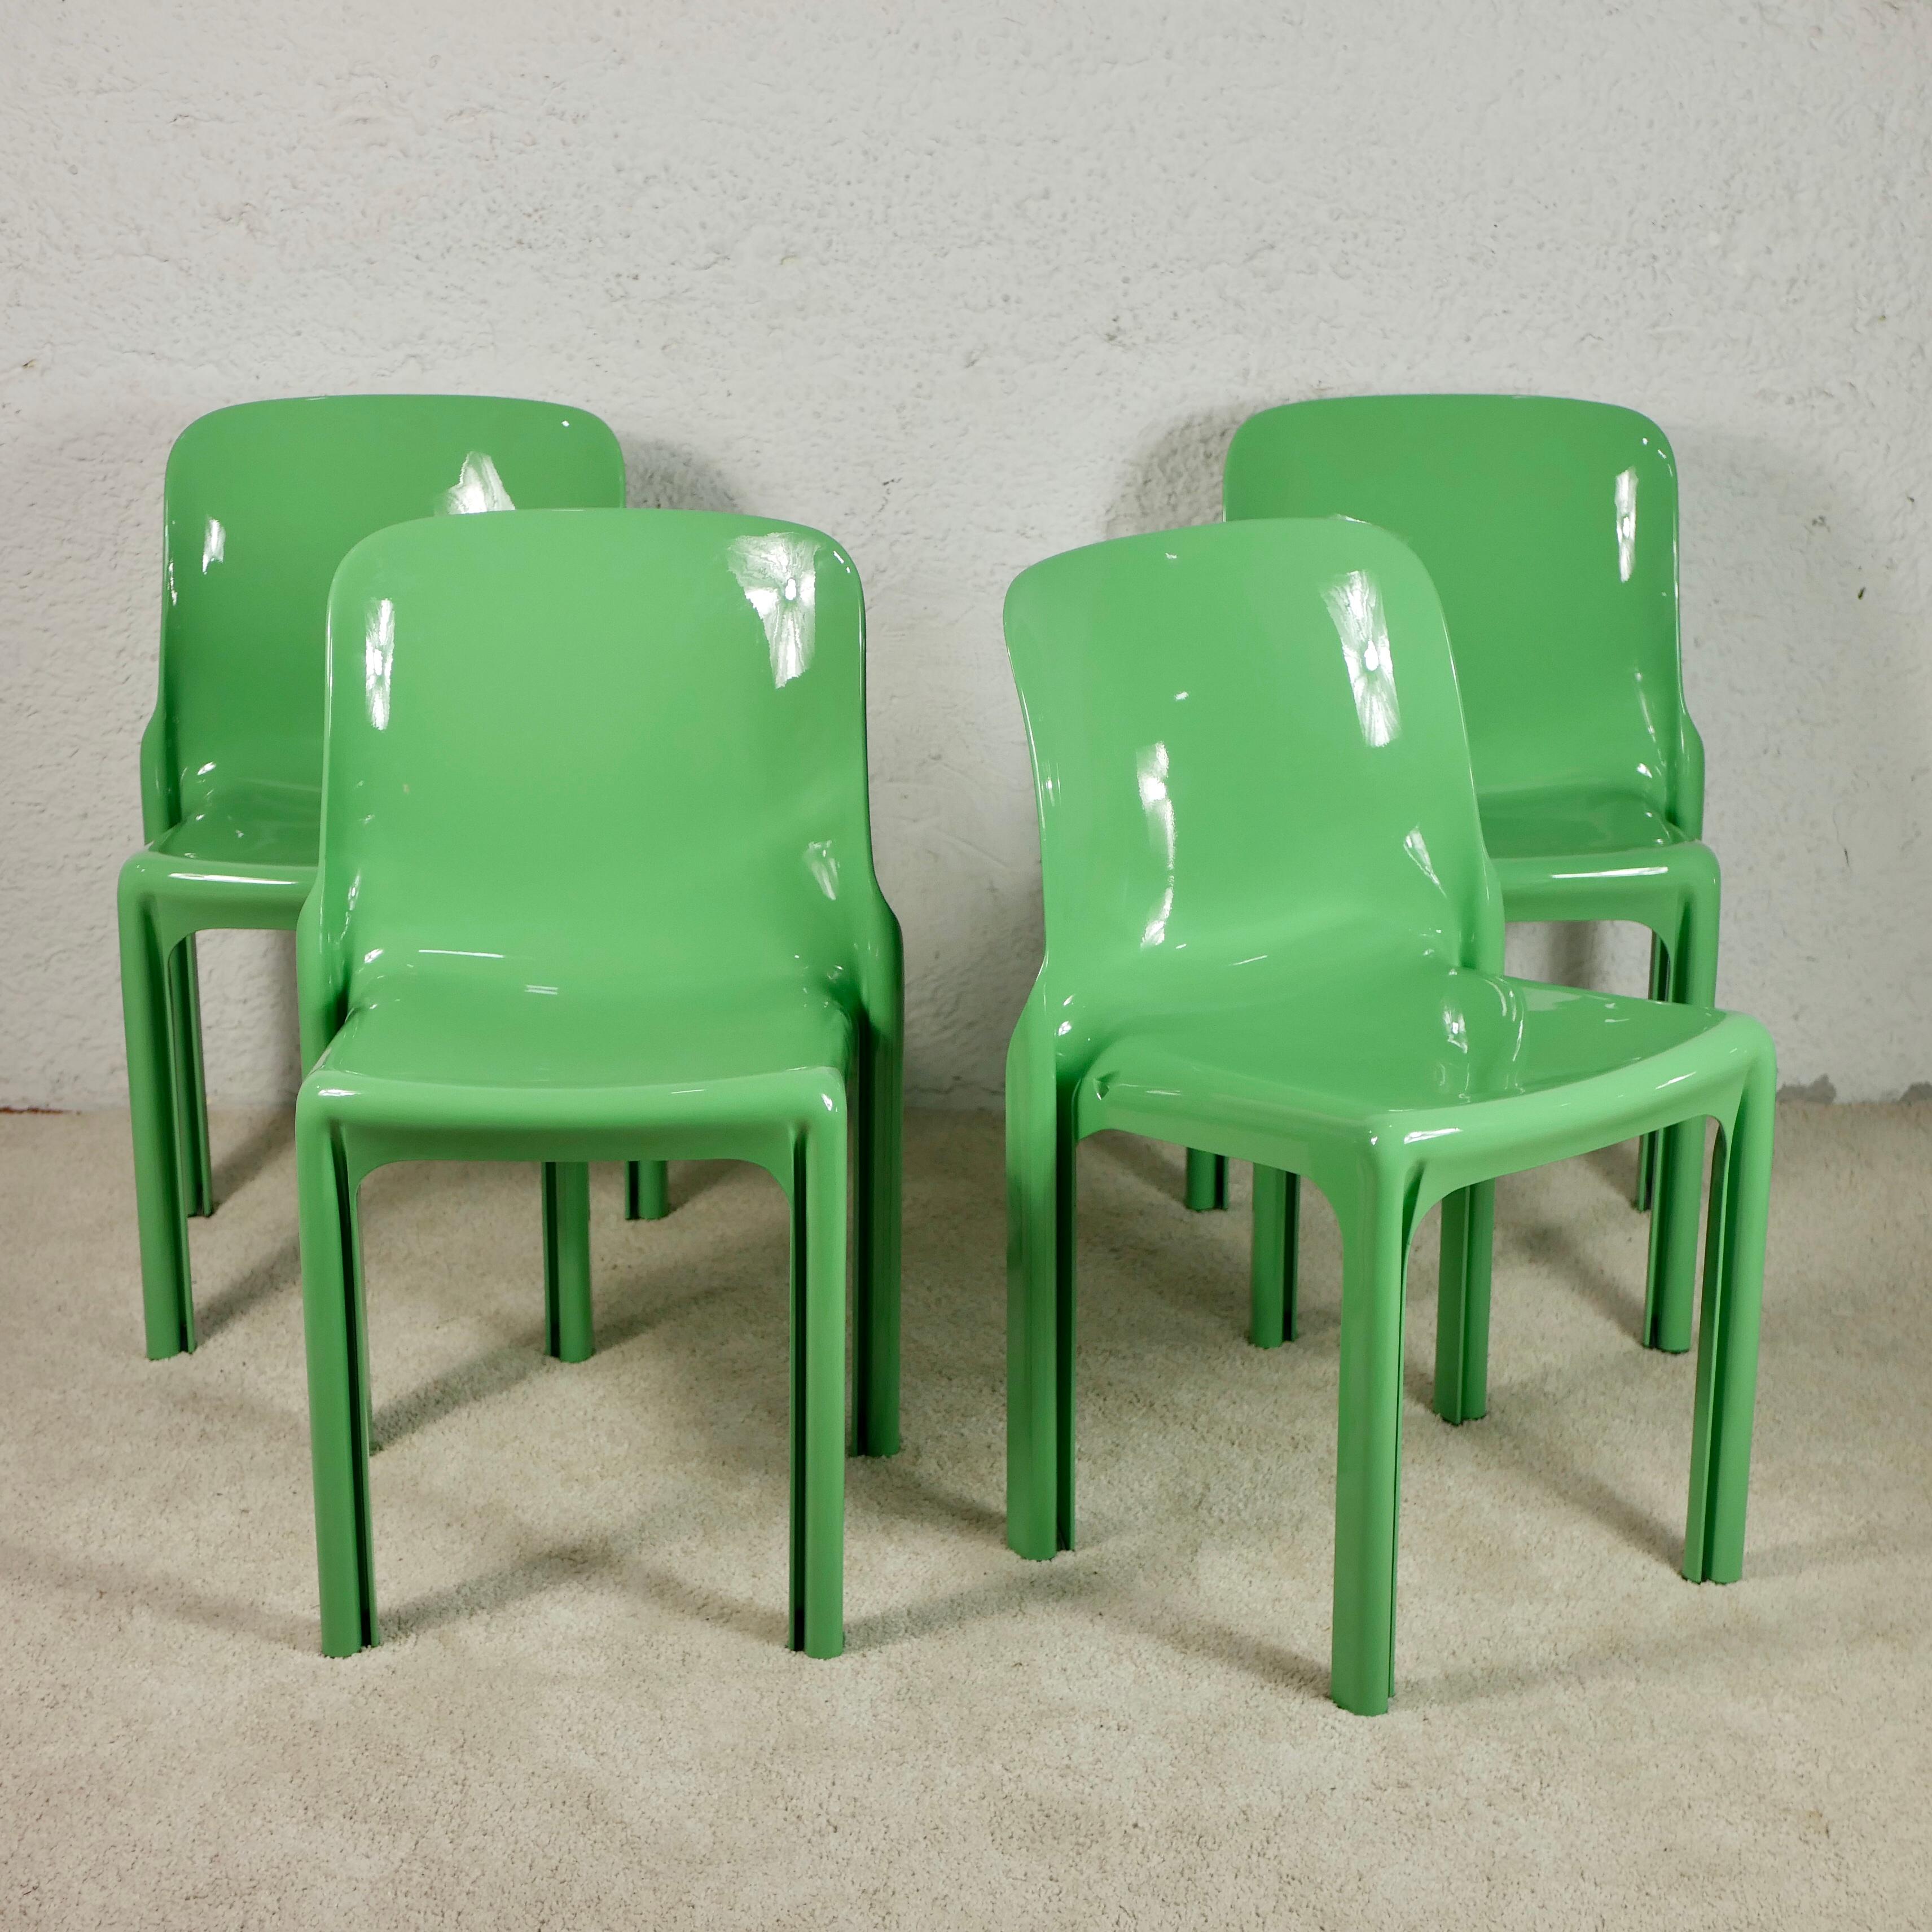 Plastic Set of 4 Selene Chairs by Vico Magistretti for Artemide